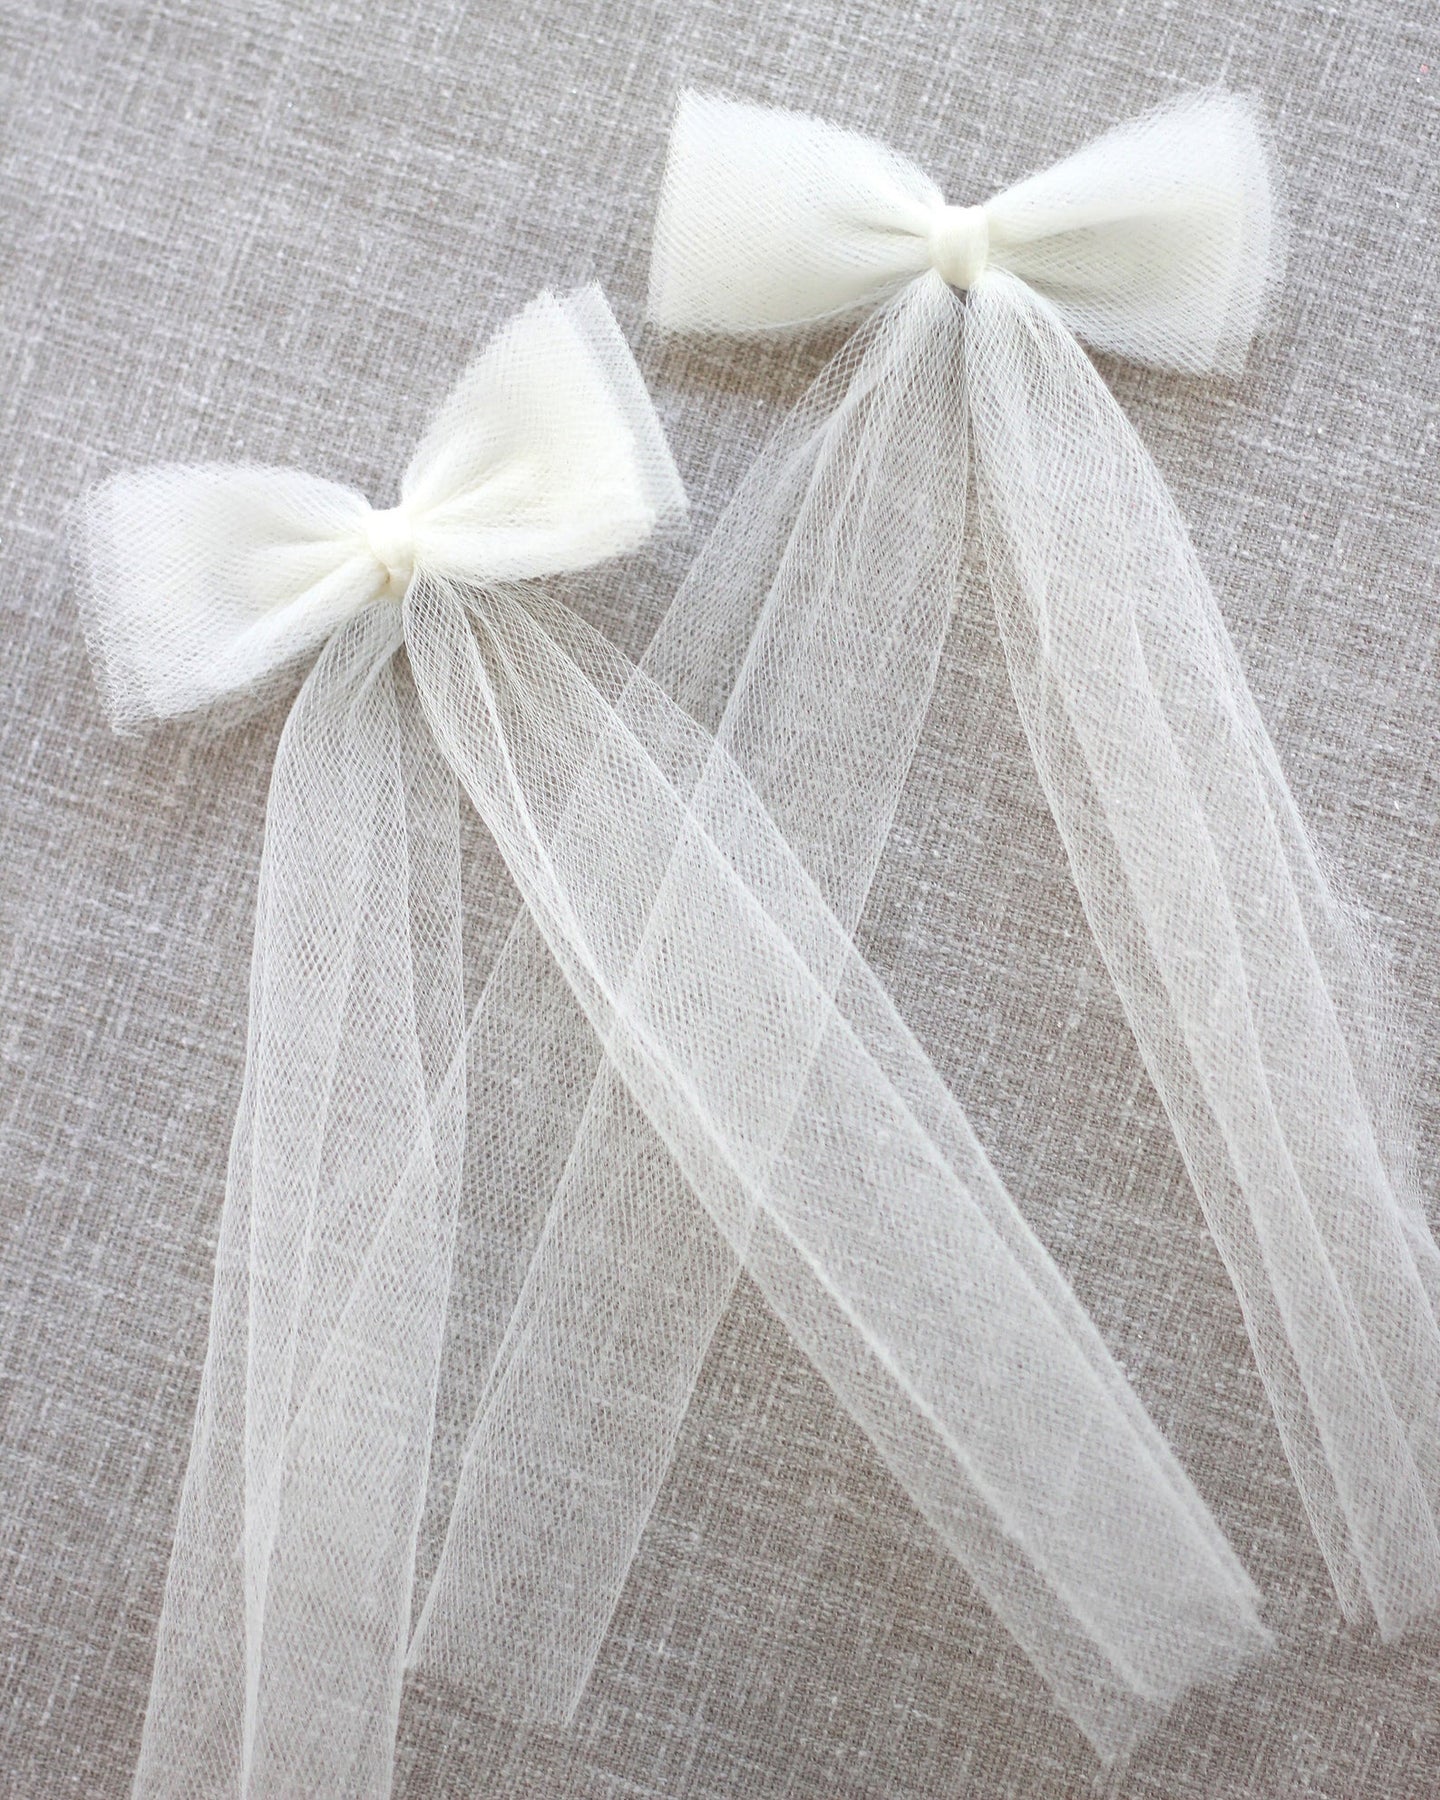 Long Tail Tulle Bow Hair Clip - Bow Hair Clips, Flower Girls Bow Ivory